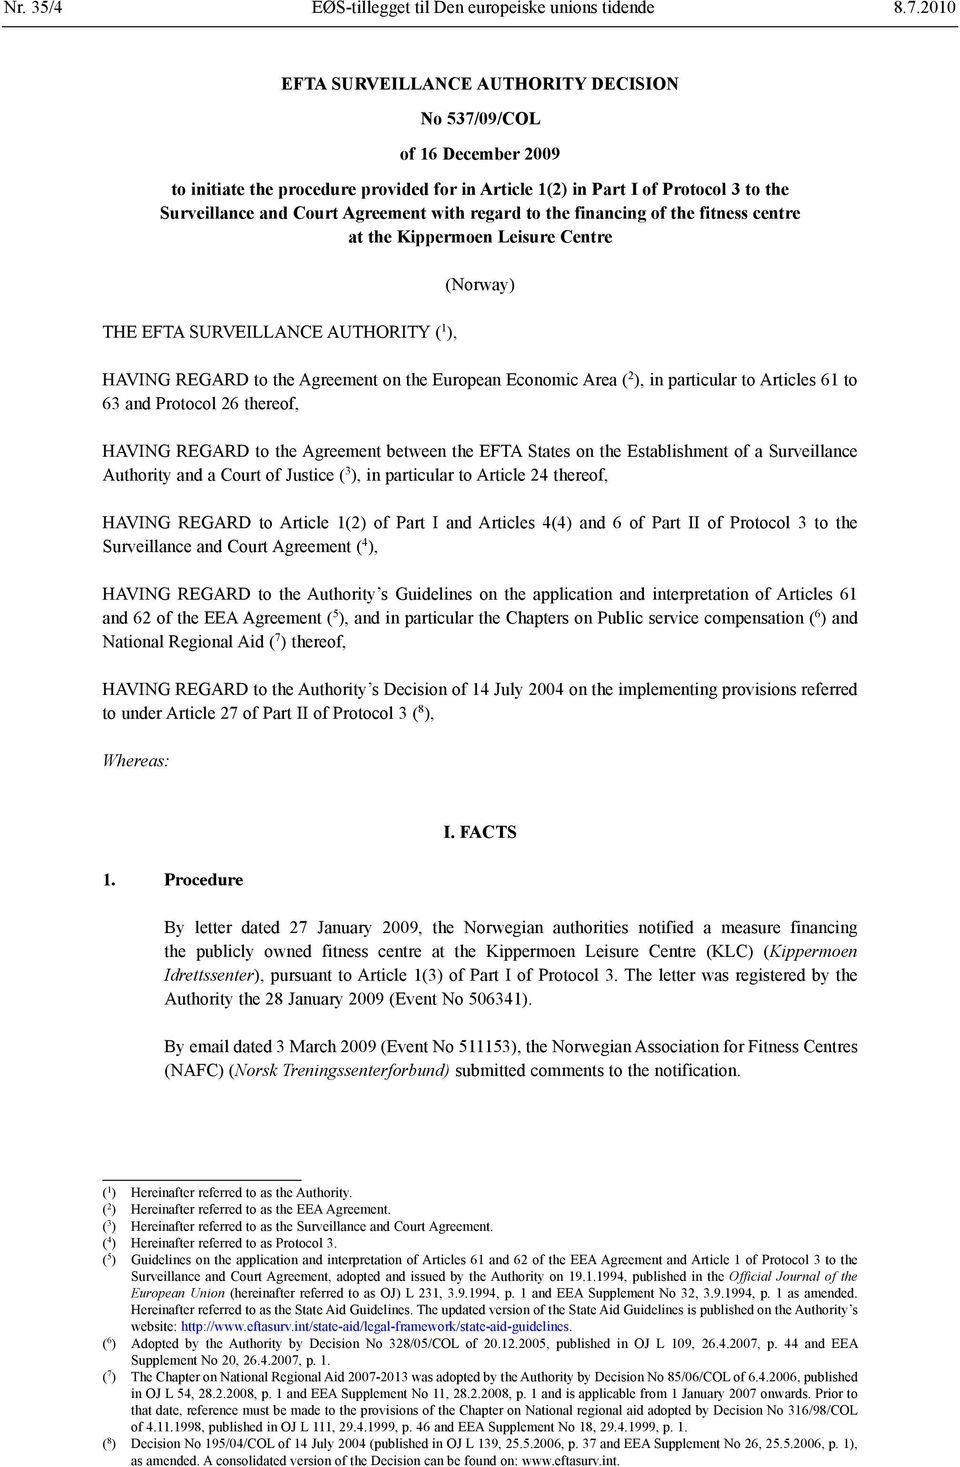 regard to the financing of the fitness centre at the Kippermoen Leisure Centre THE EFTA SURVEILLANCE AUTHORITY ( 1 ), (Norway) HAVING REGARD to the Agreement on the European Economic Area ( 2 ), in